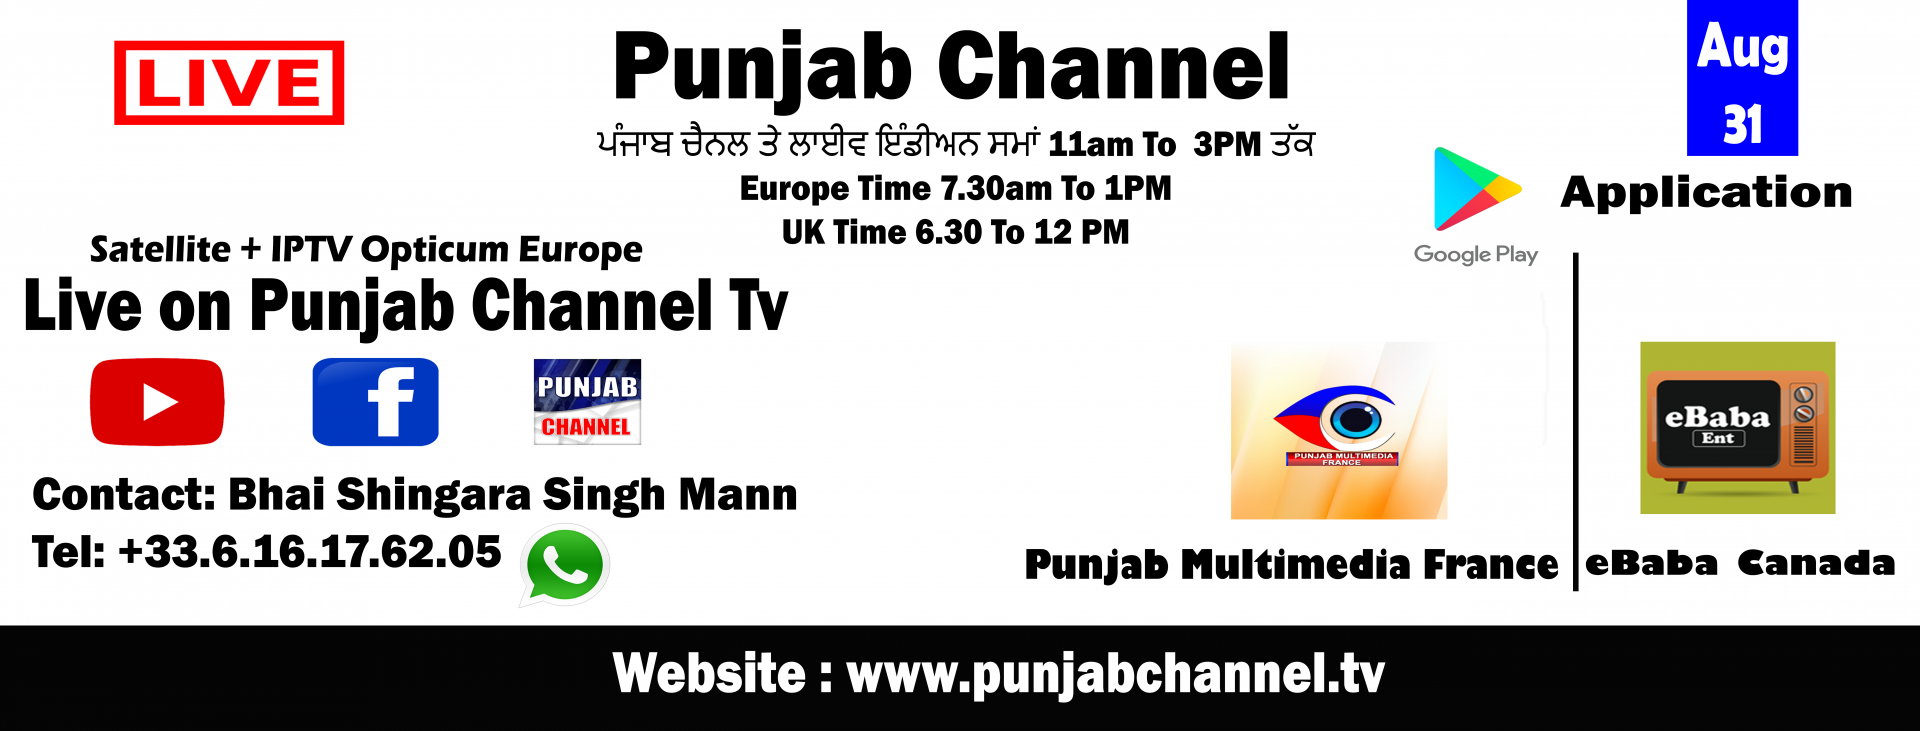 Youtube Channel - Punjab Channel